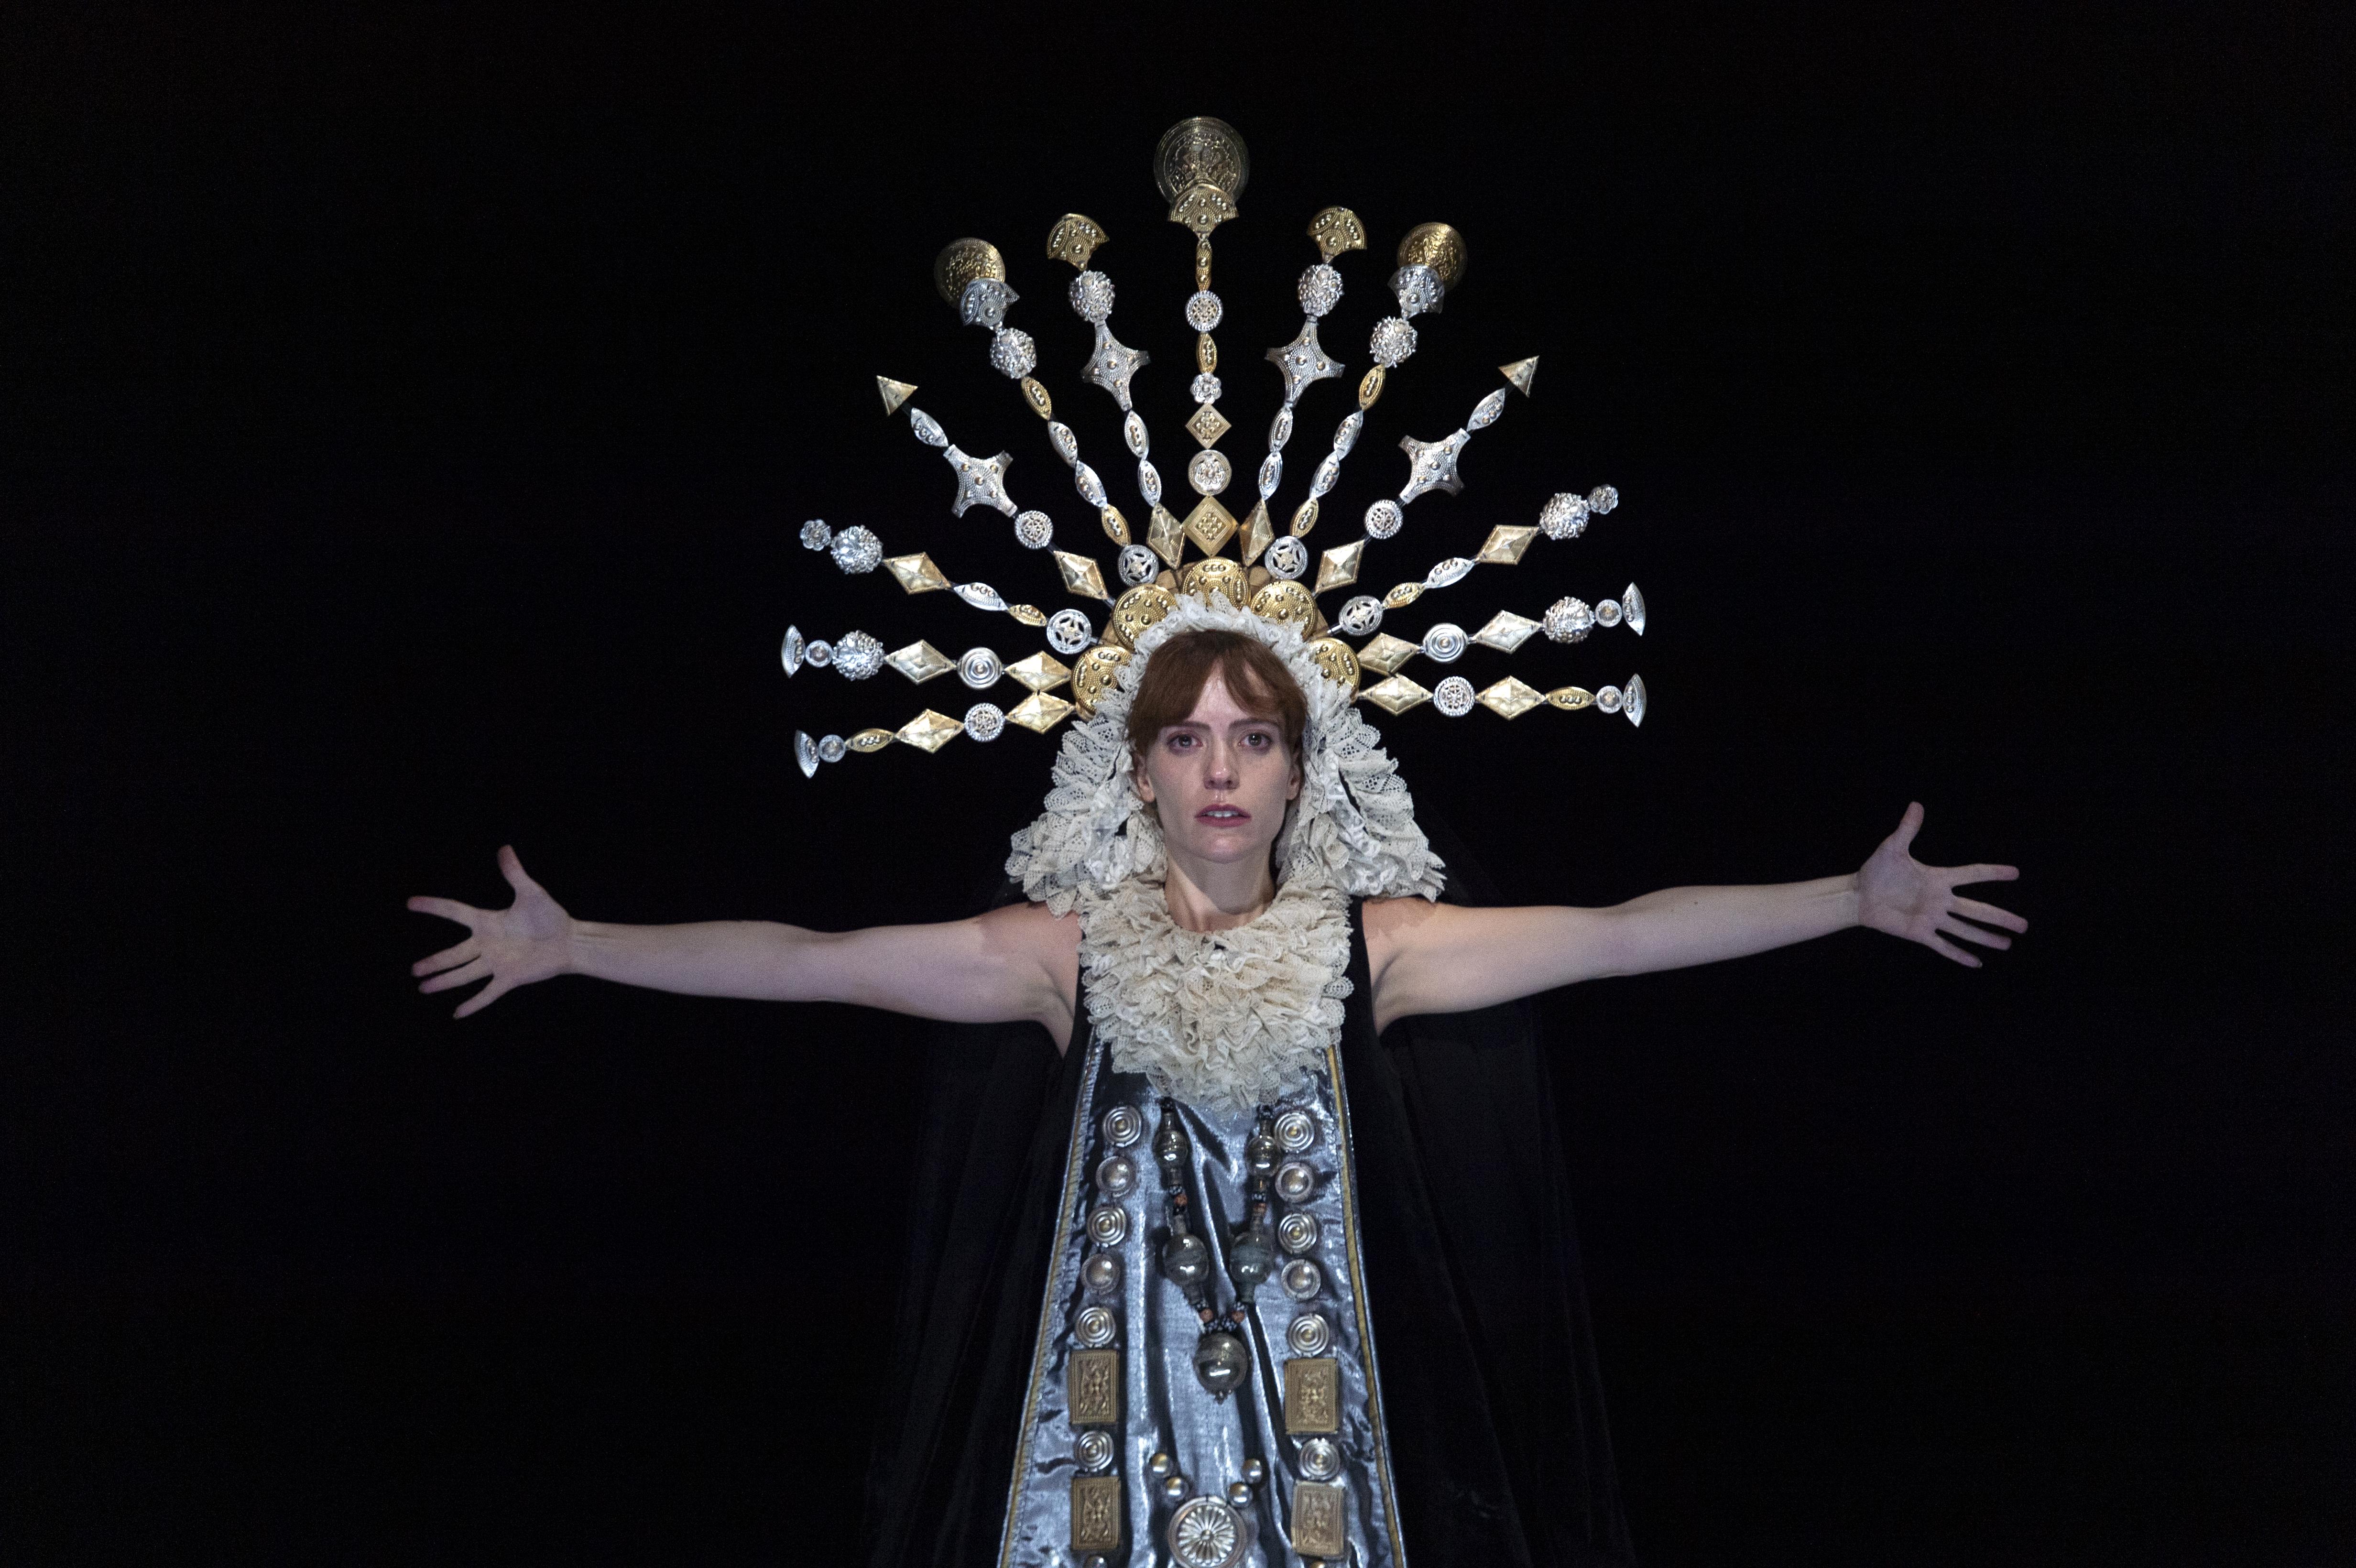 Woman in darkness whose face is bathed in light, wearing a crown in the shape of a halo, with her arms opened.  